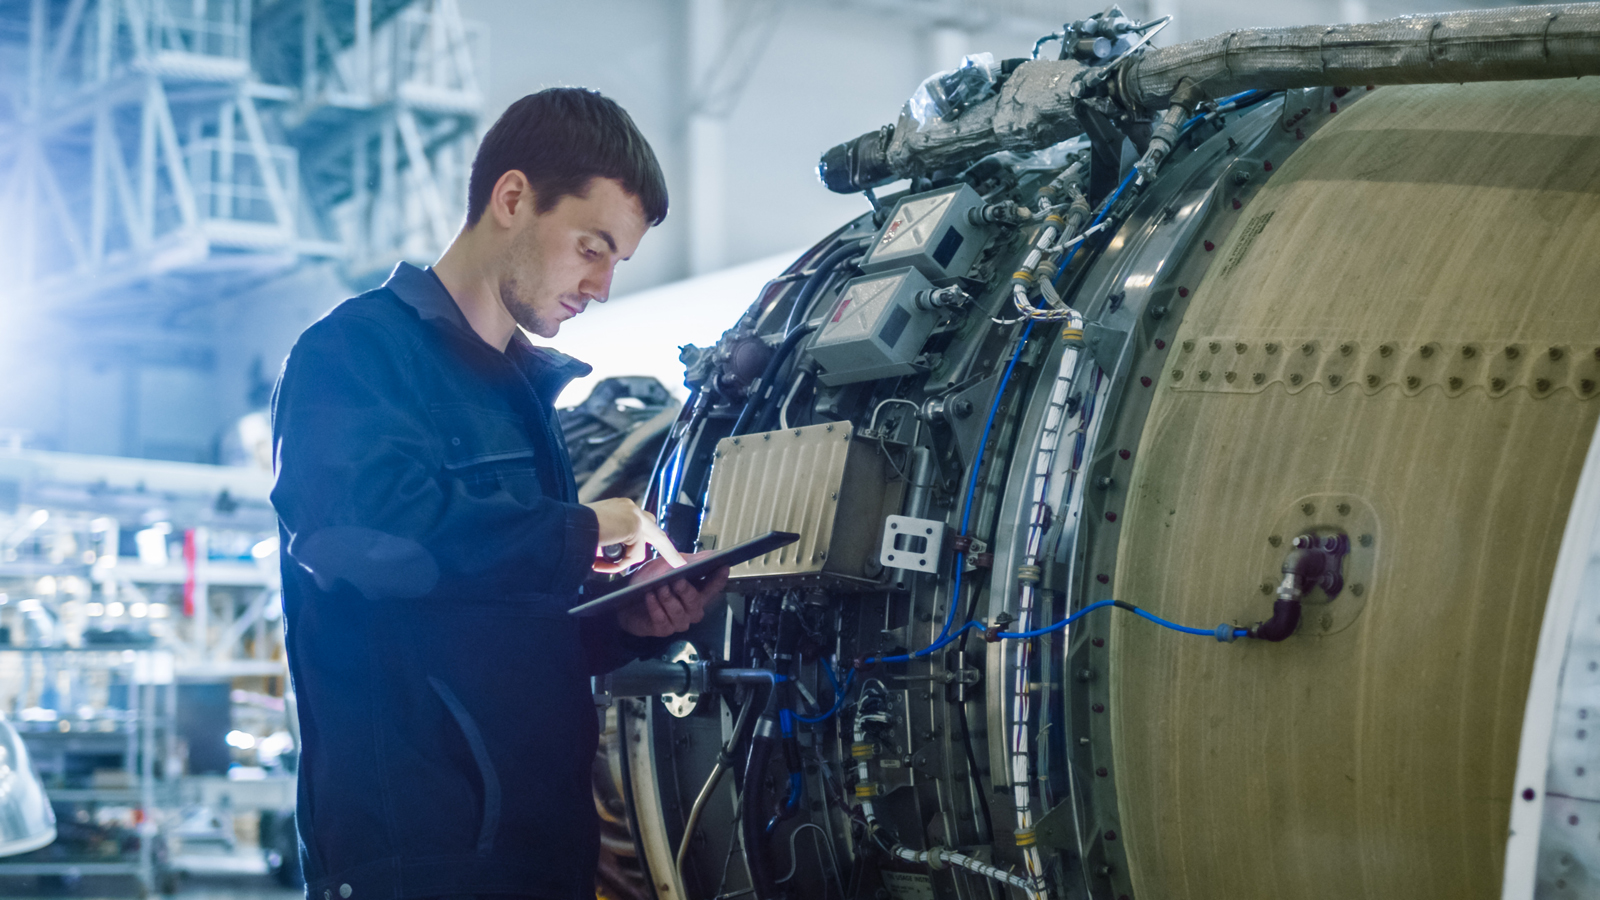 Aircraft Maintenance Mechanic Inspecting and Working on Airplane